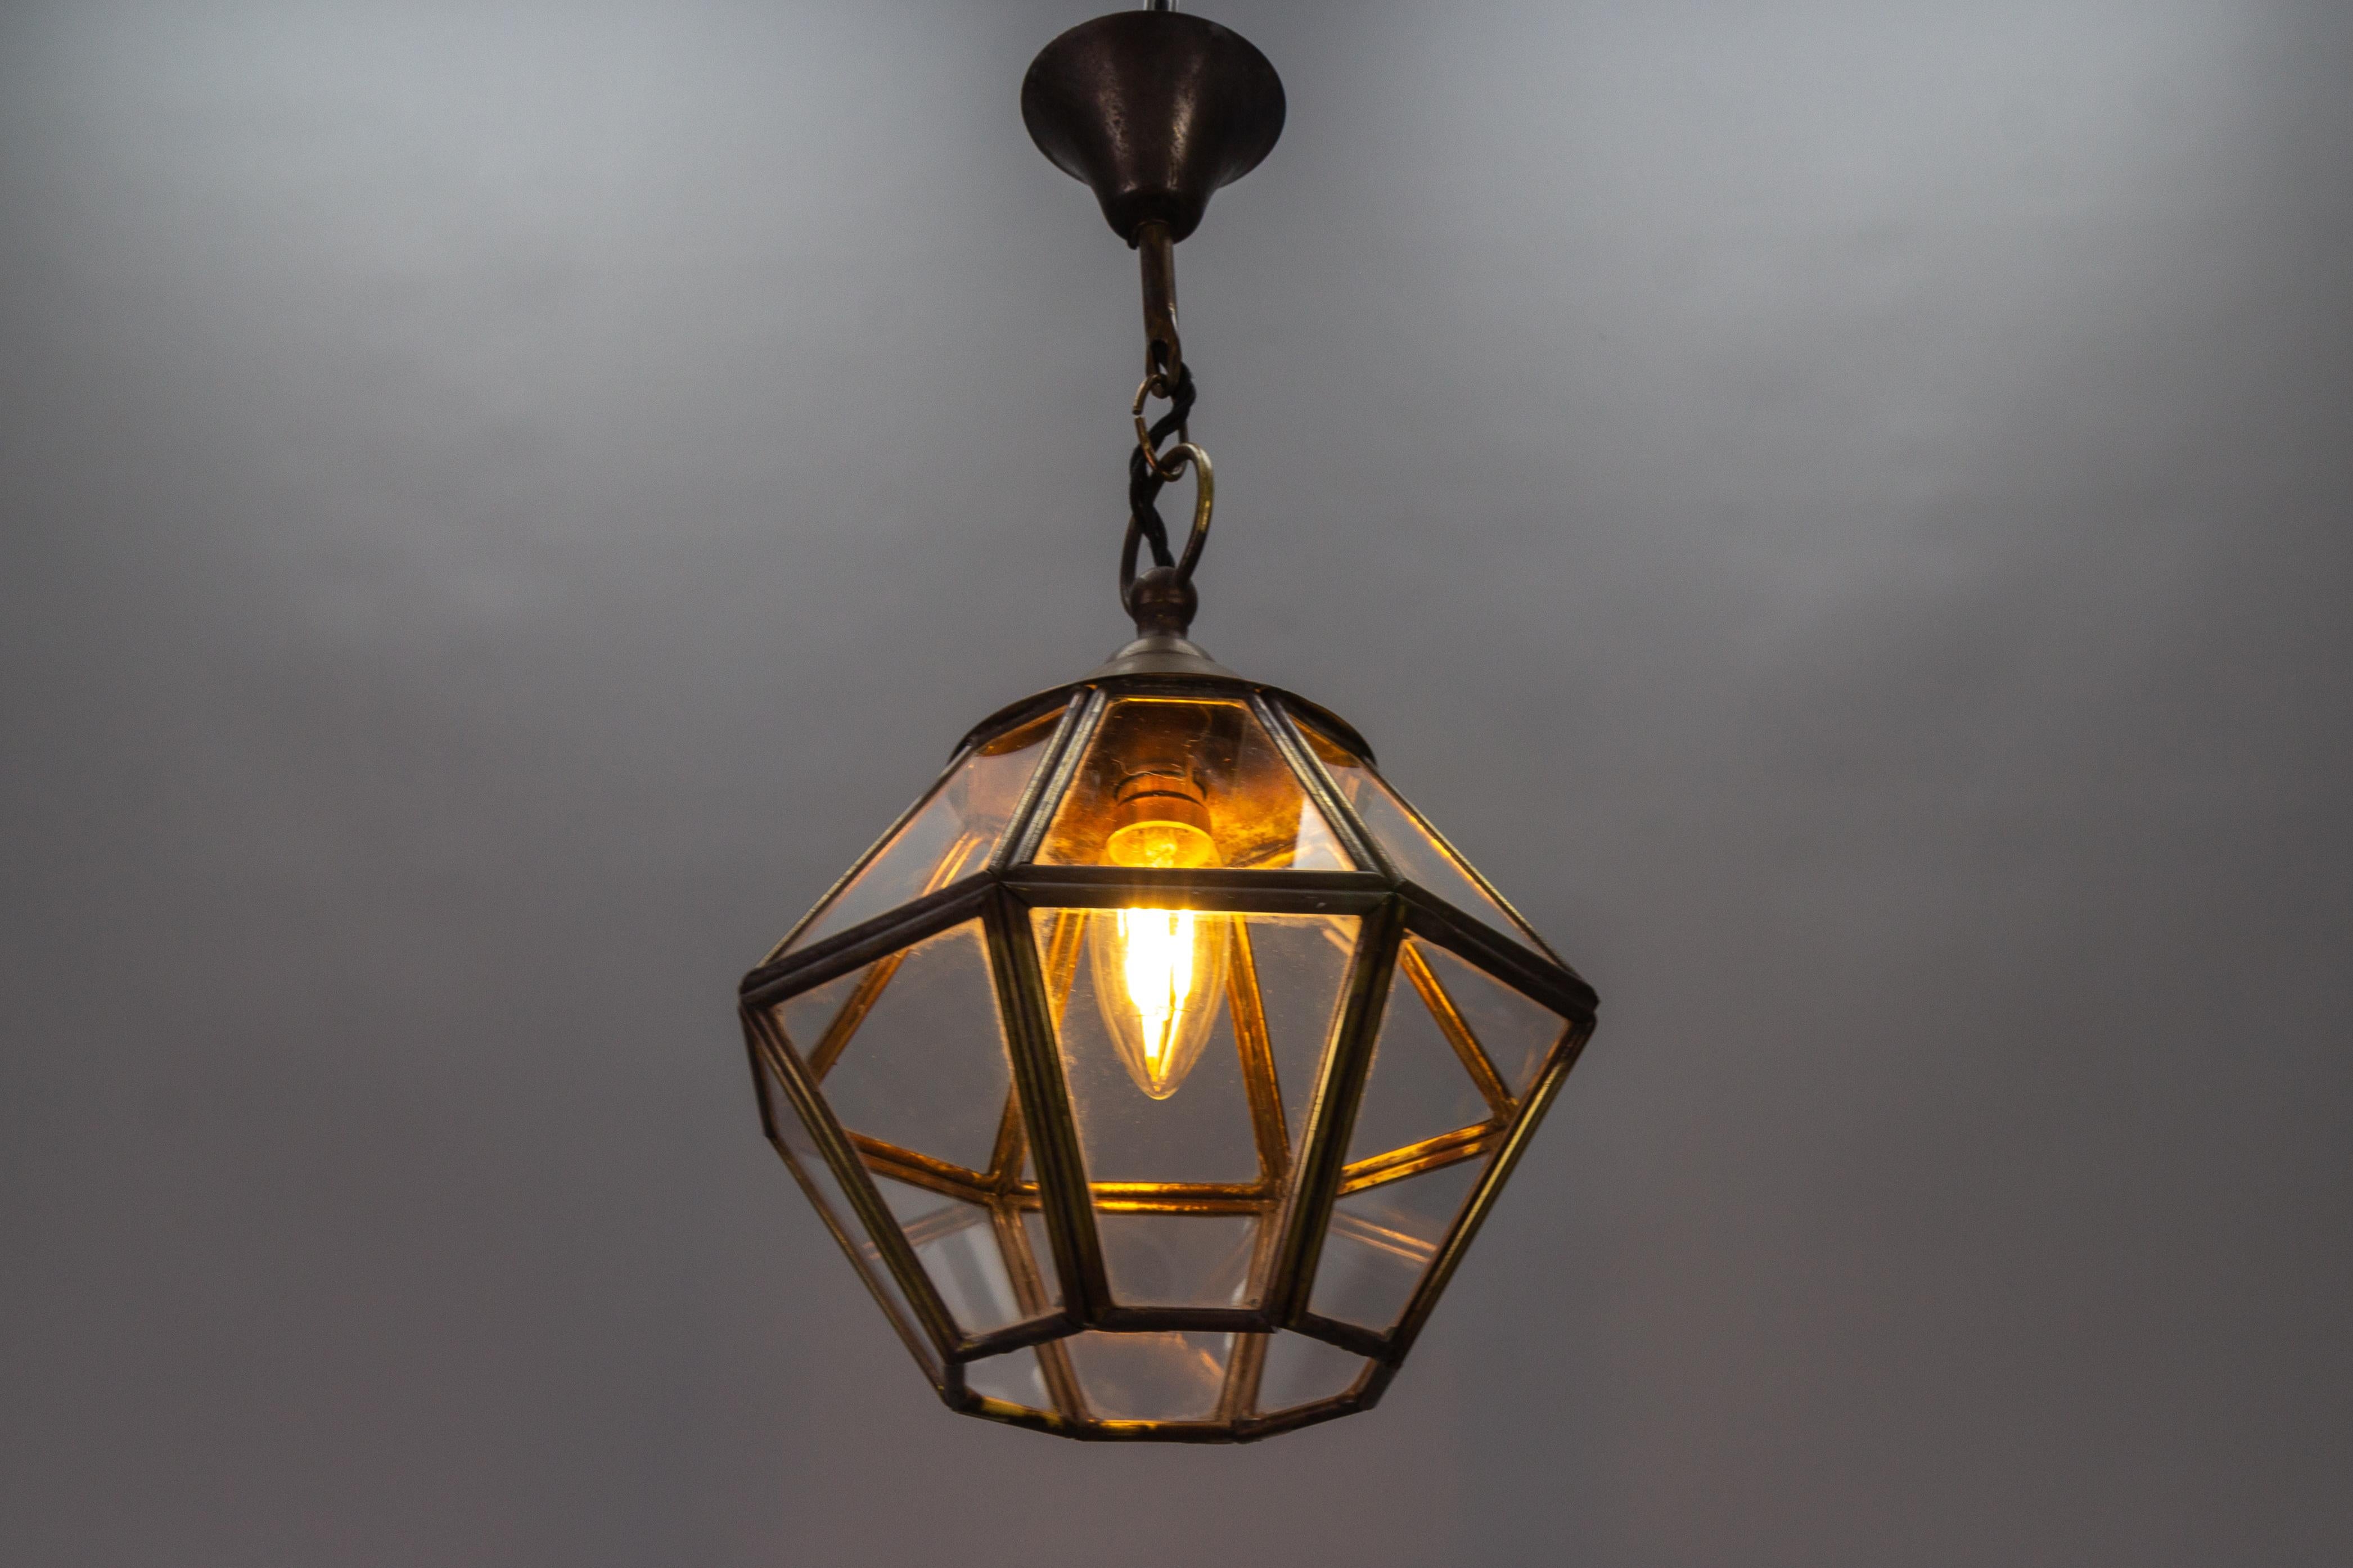 French Midcentury-Modern Brass and Clear Glass Octagonal Hanging Lantern In Good Condition For Sale In Barntrup, DE